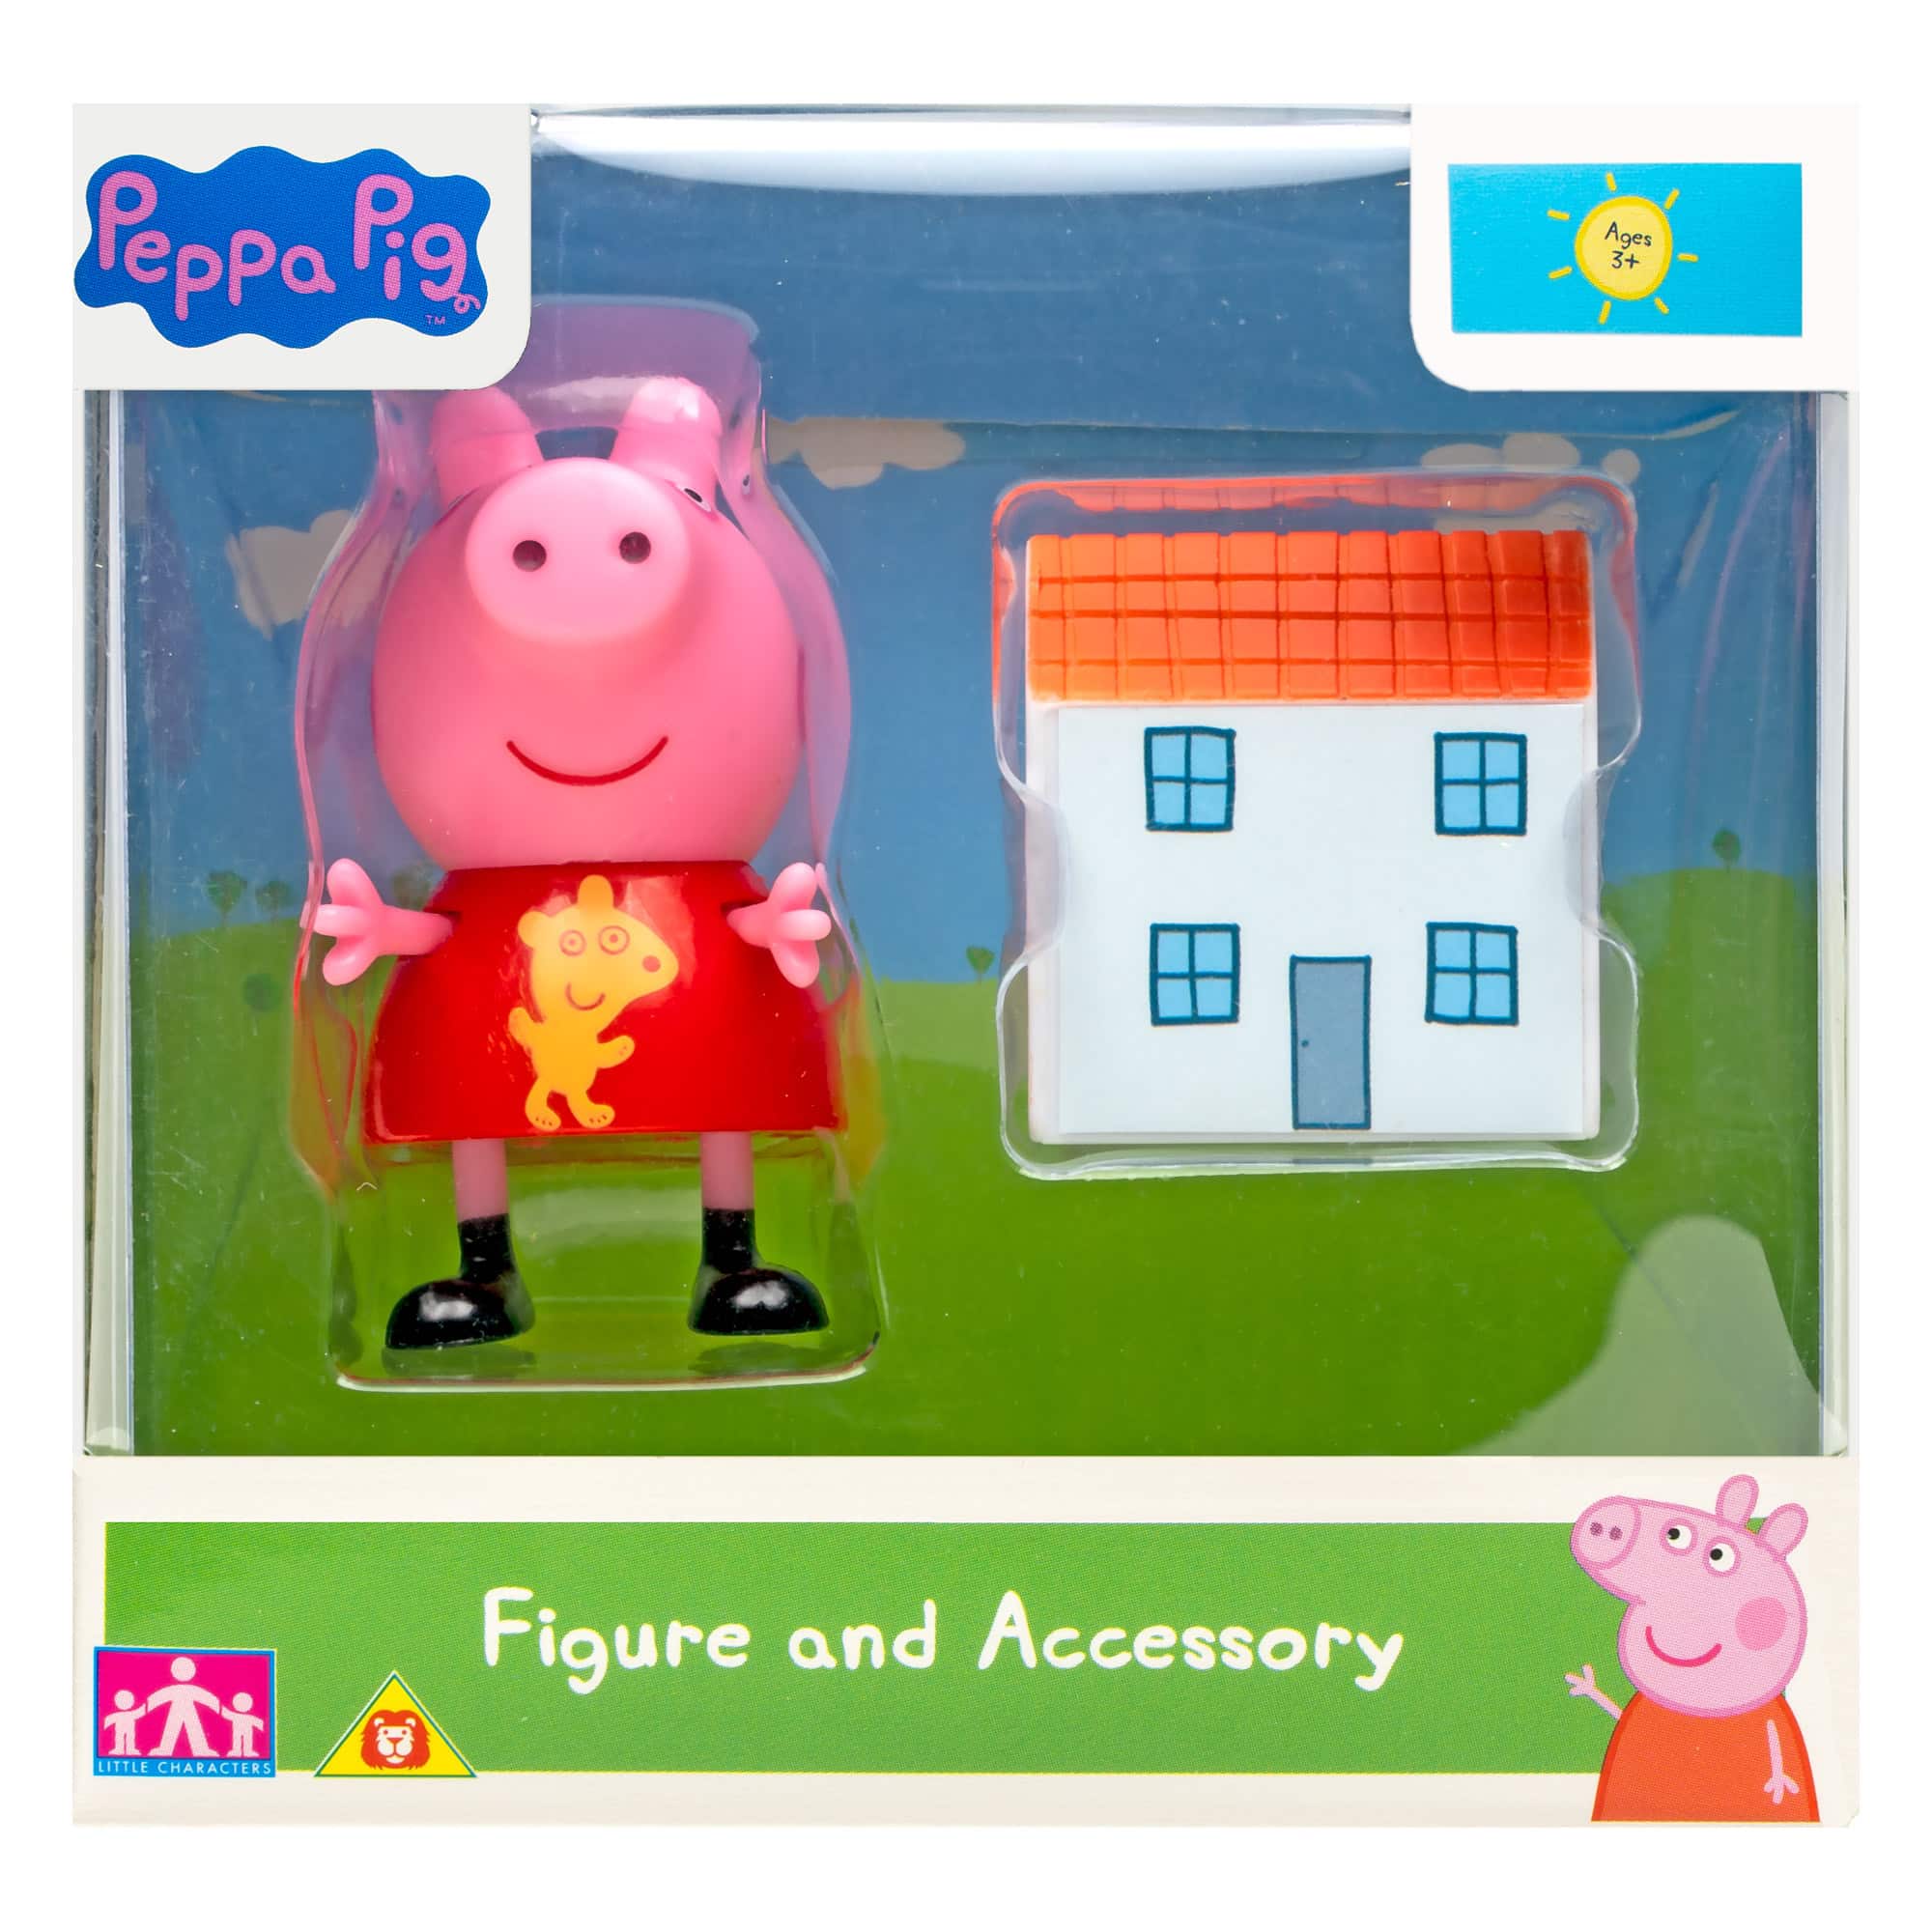 Peppa Pig - Figure and Accessory - Assorted